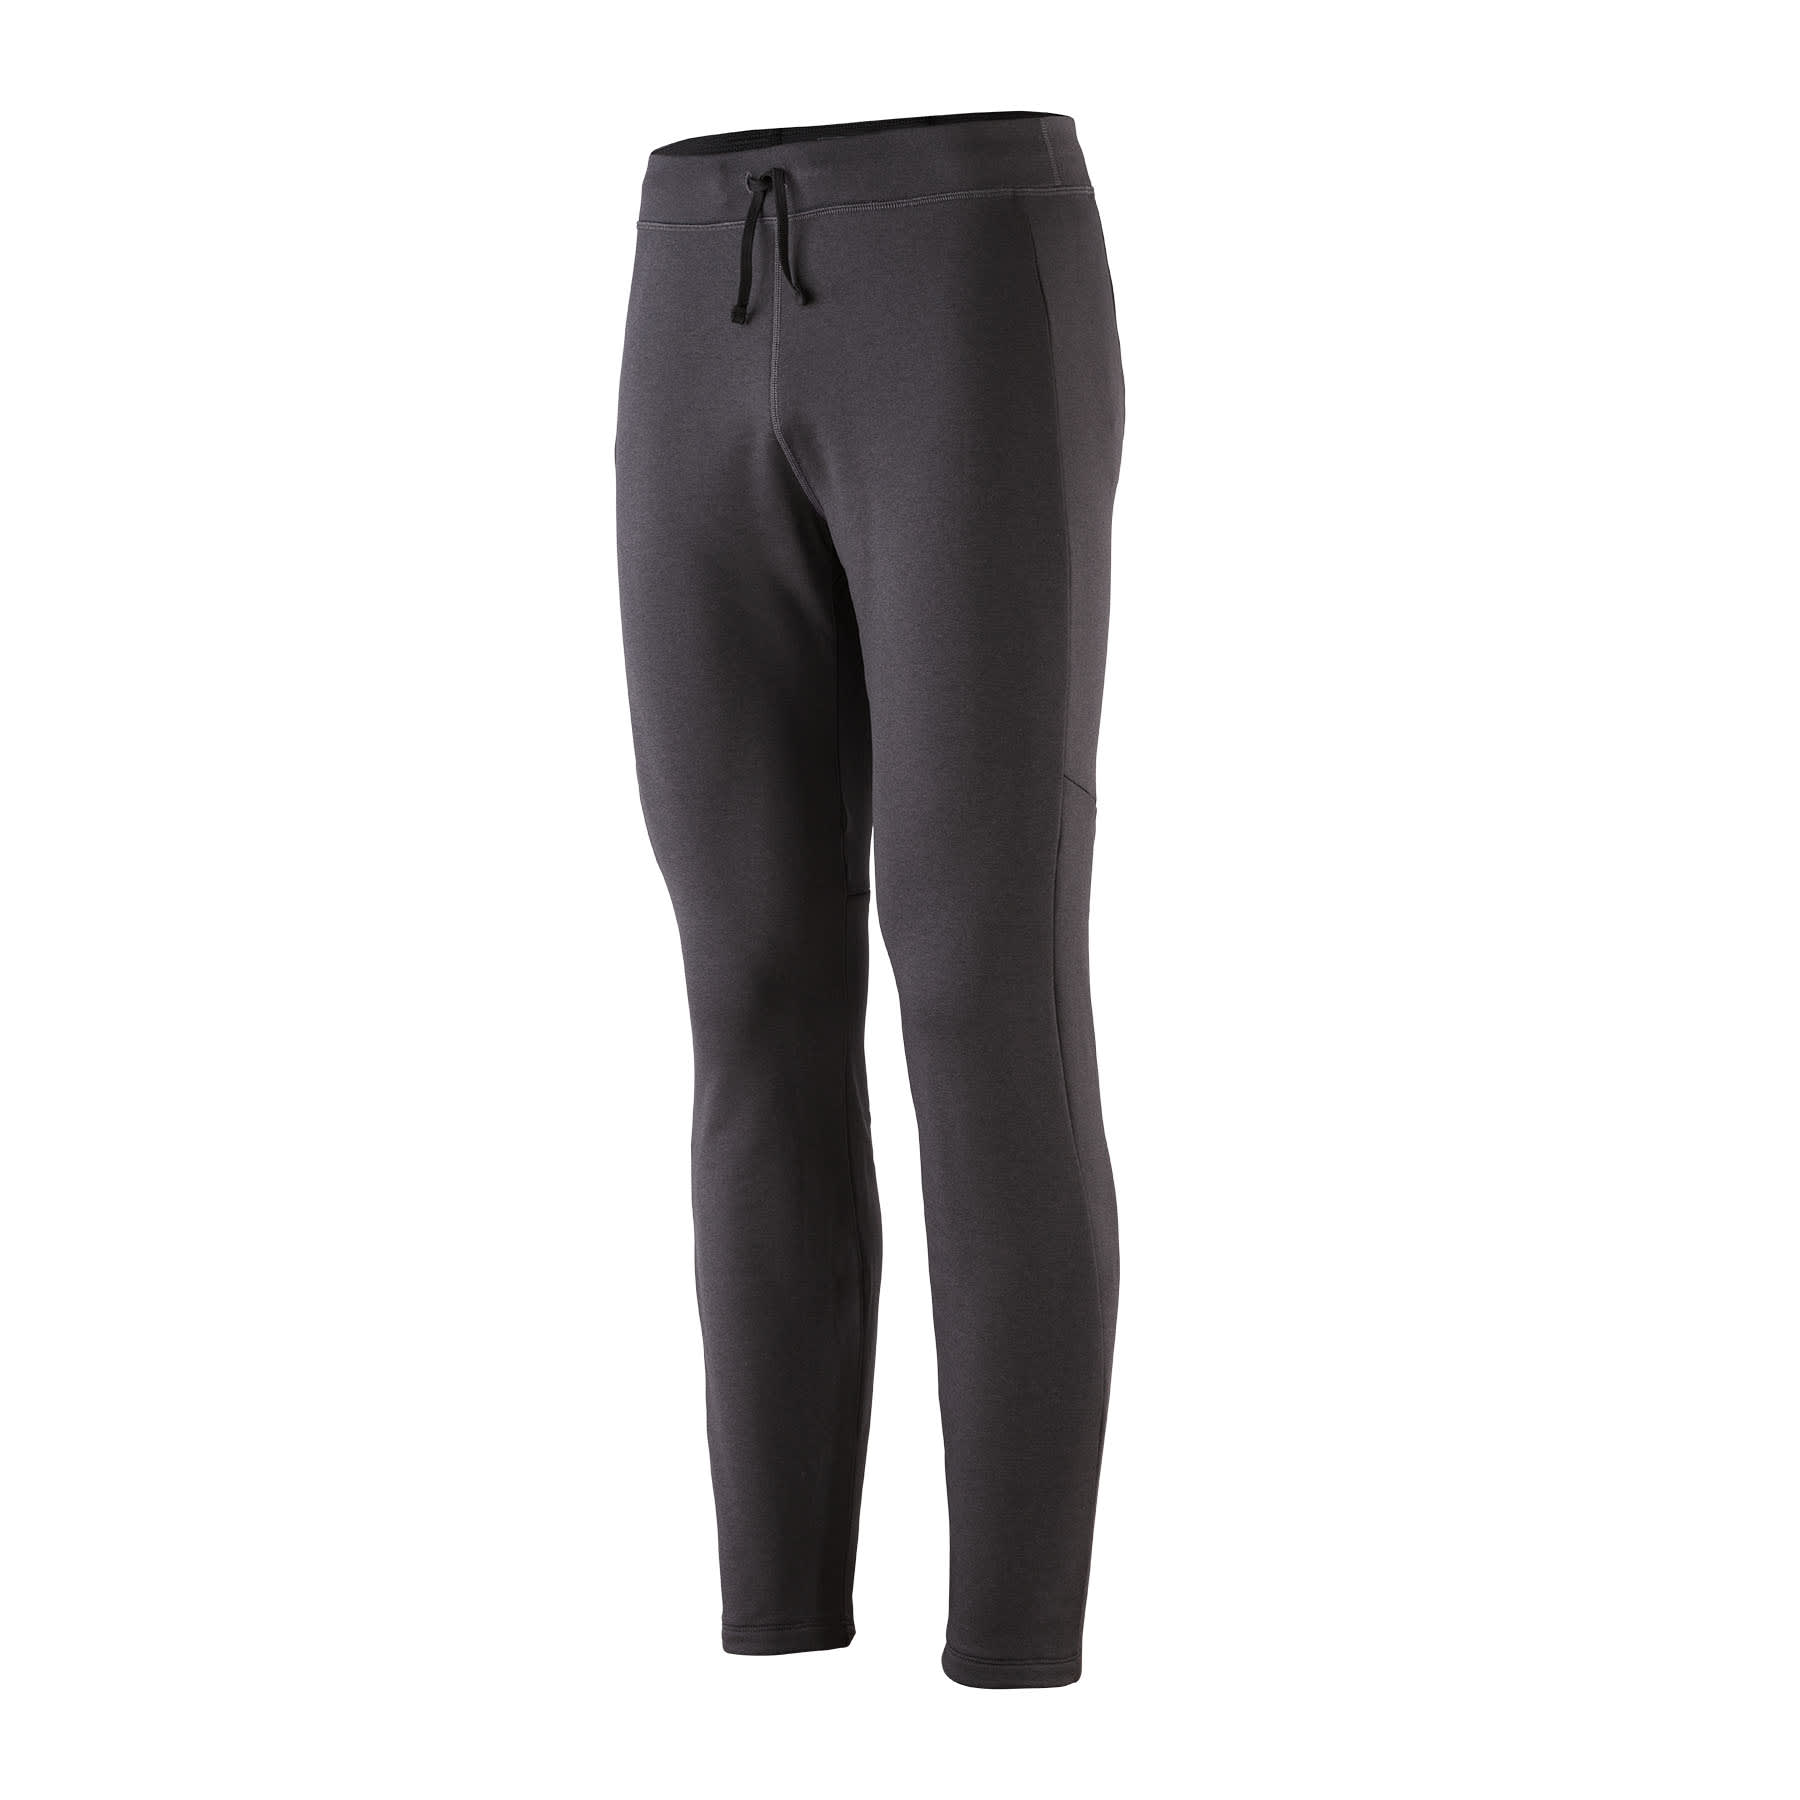 Buy Patagonia Men's R1 Daily Bottoms from Outnorth